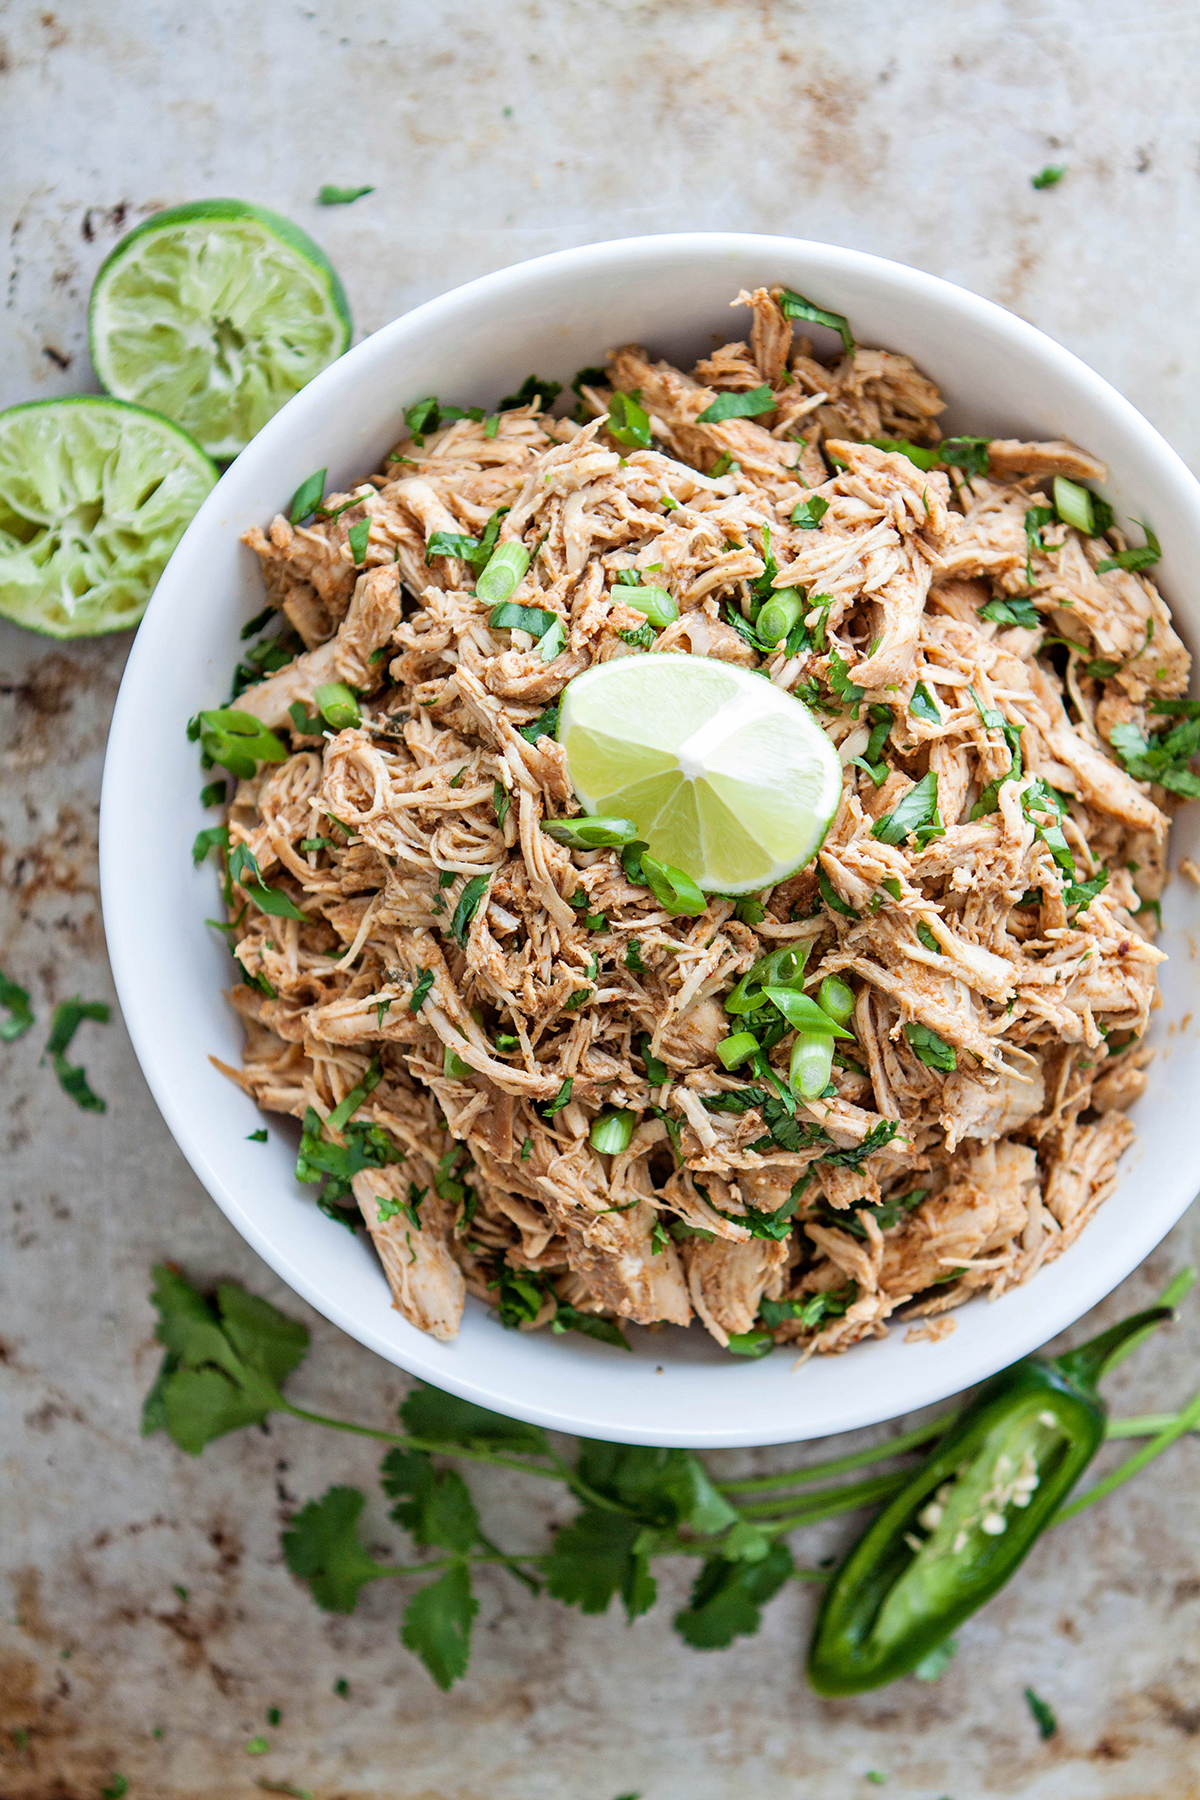 How to Shred Chicken (3 Easy Ways!) | Good Life Eats